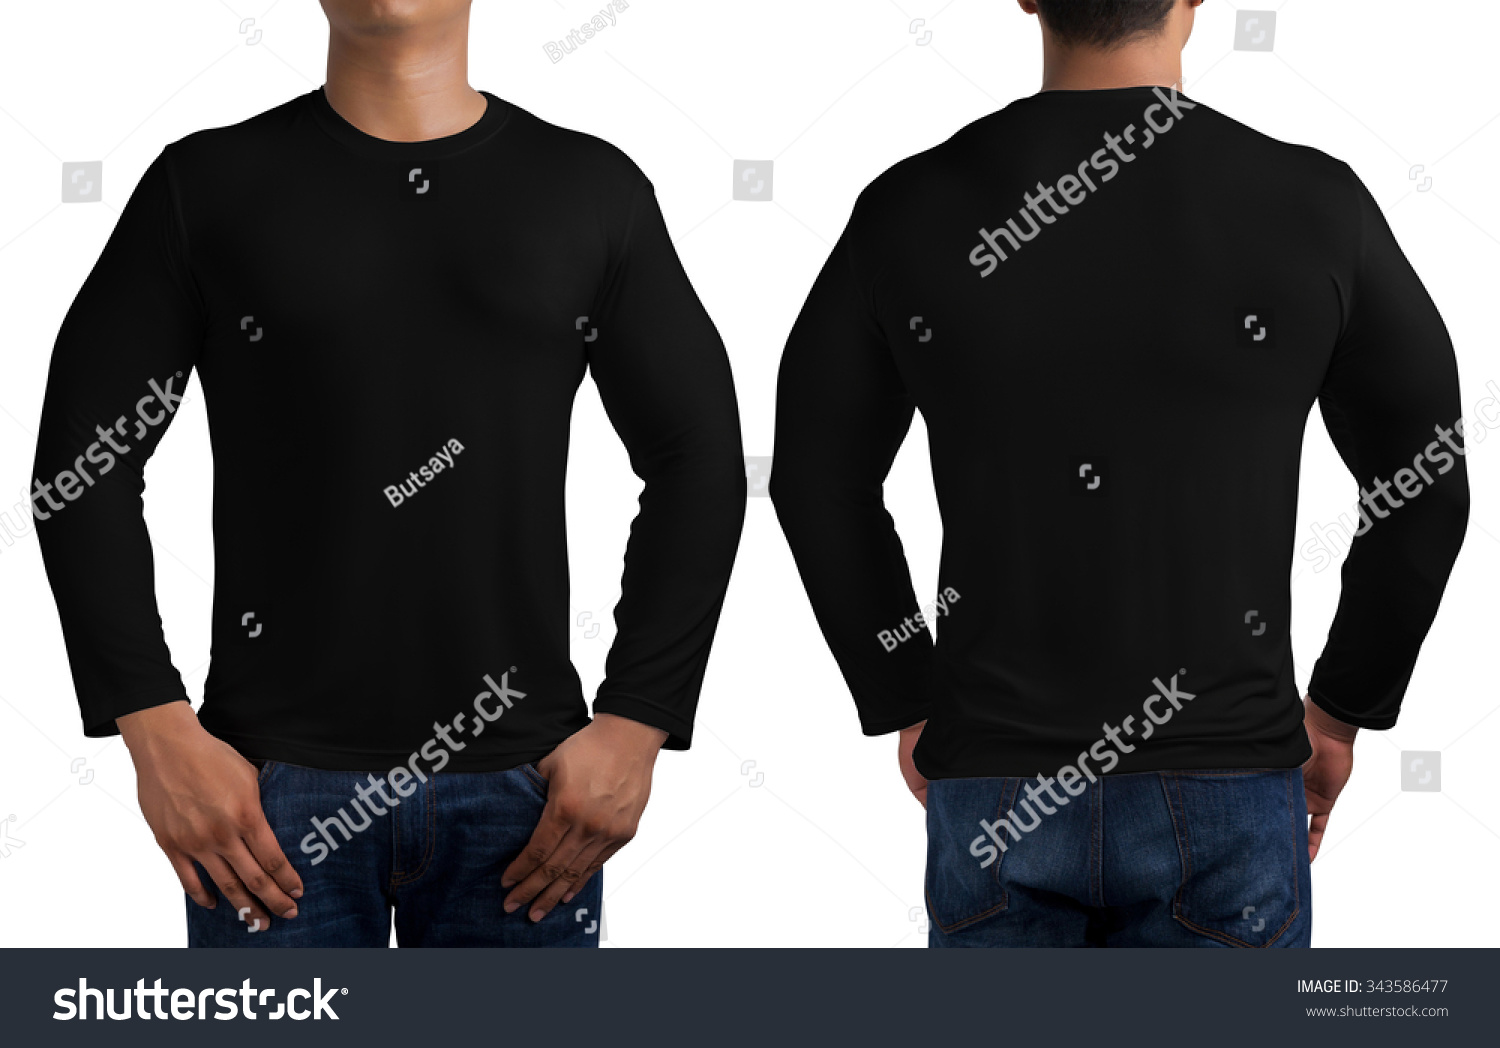 Man Body In Black Long Sleeves T-Shirt Isolated On White Background ...